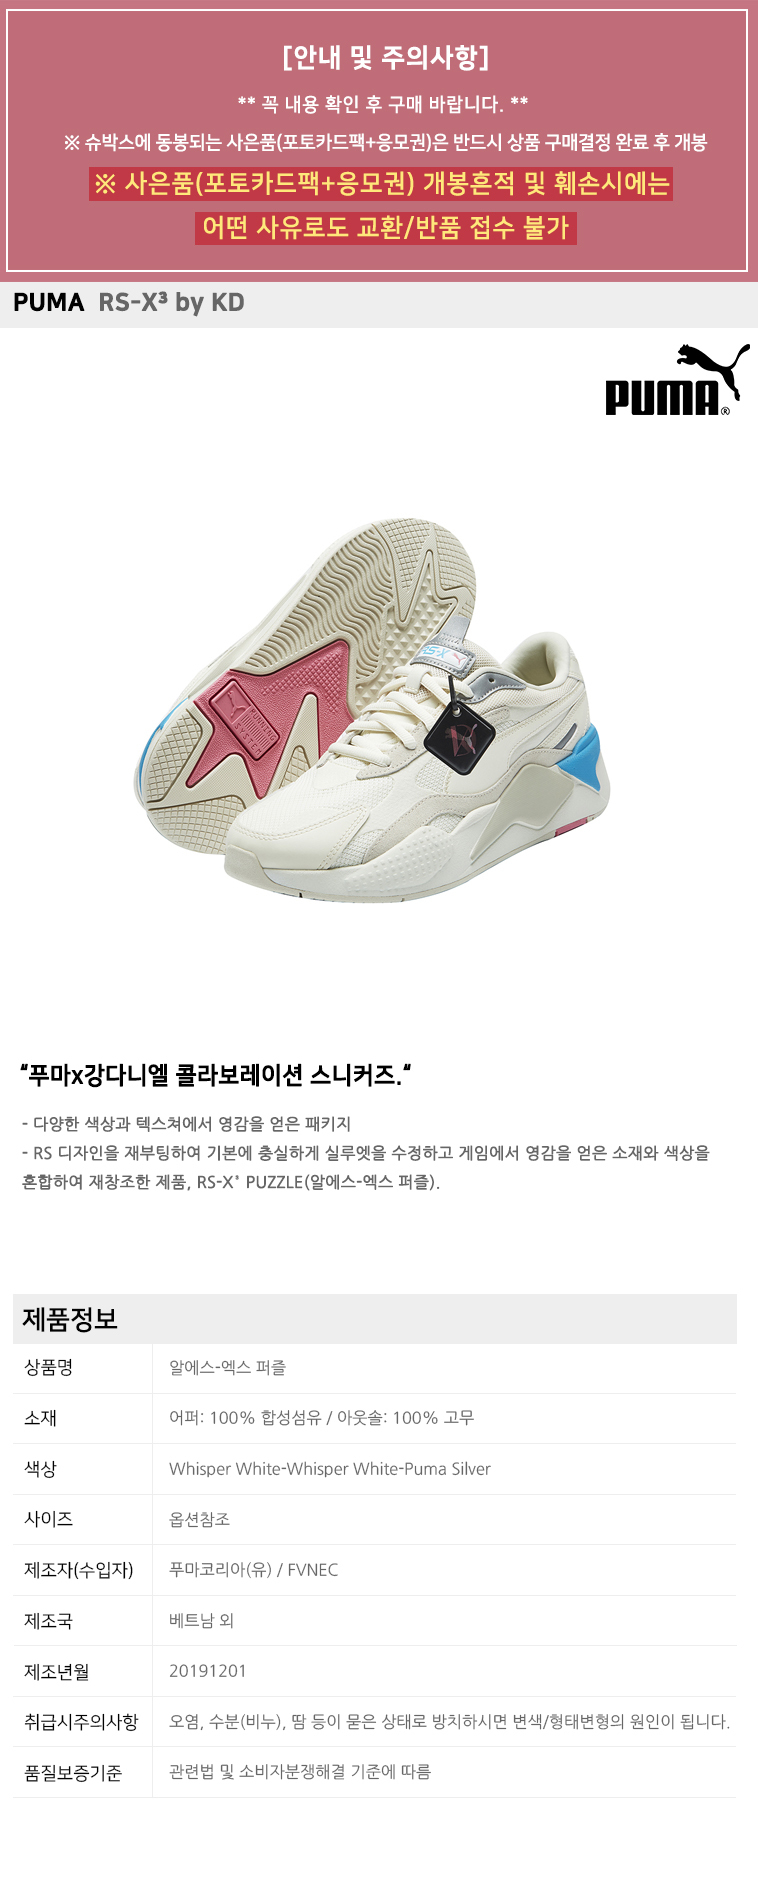 puma store exchange policy